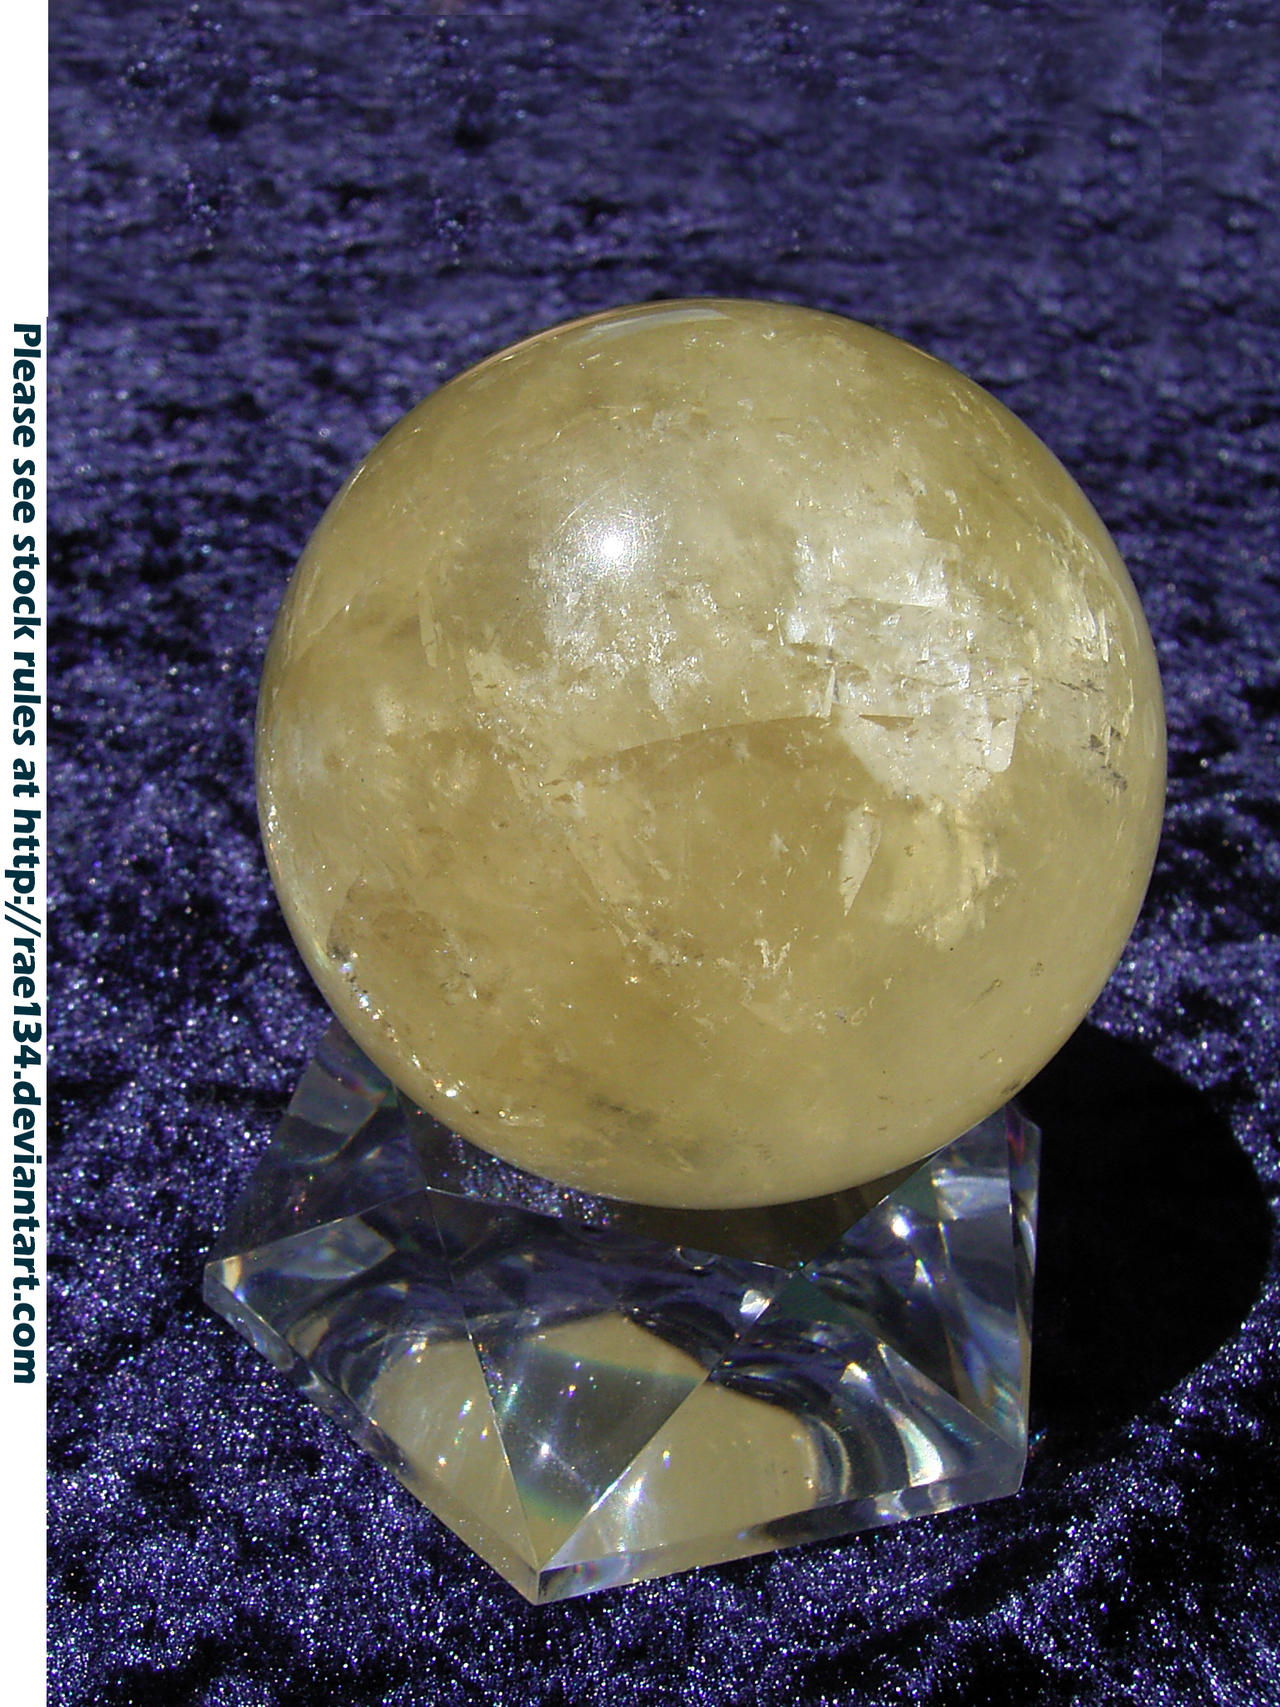 Calcite Crystal Ball 2 by Rae134 on DeviantArt